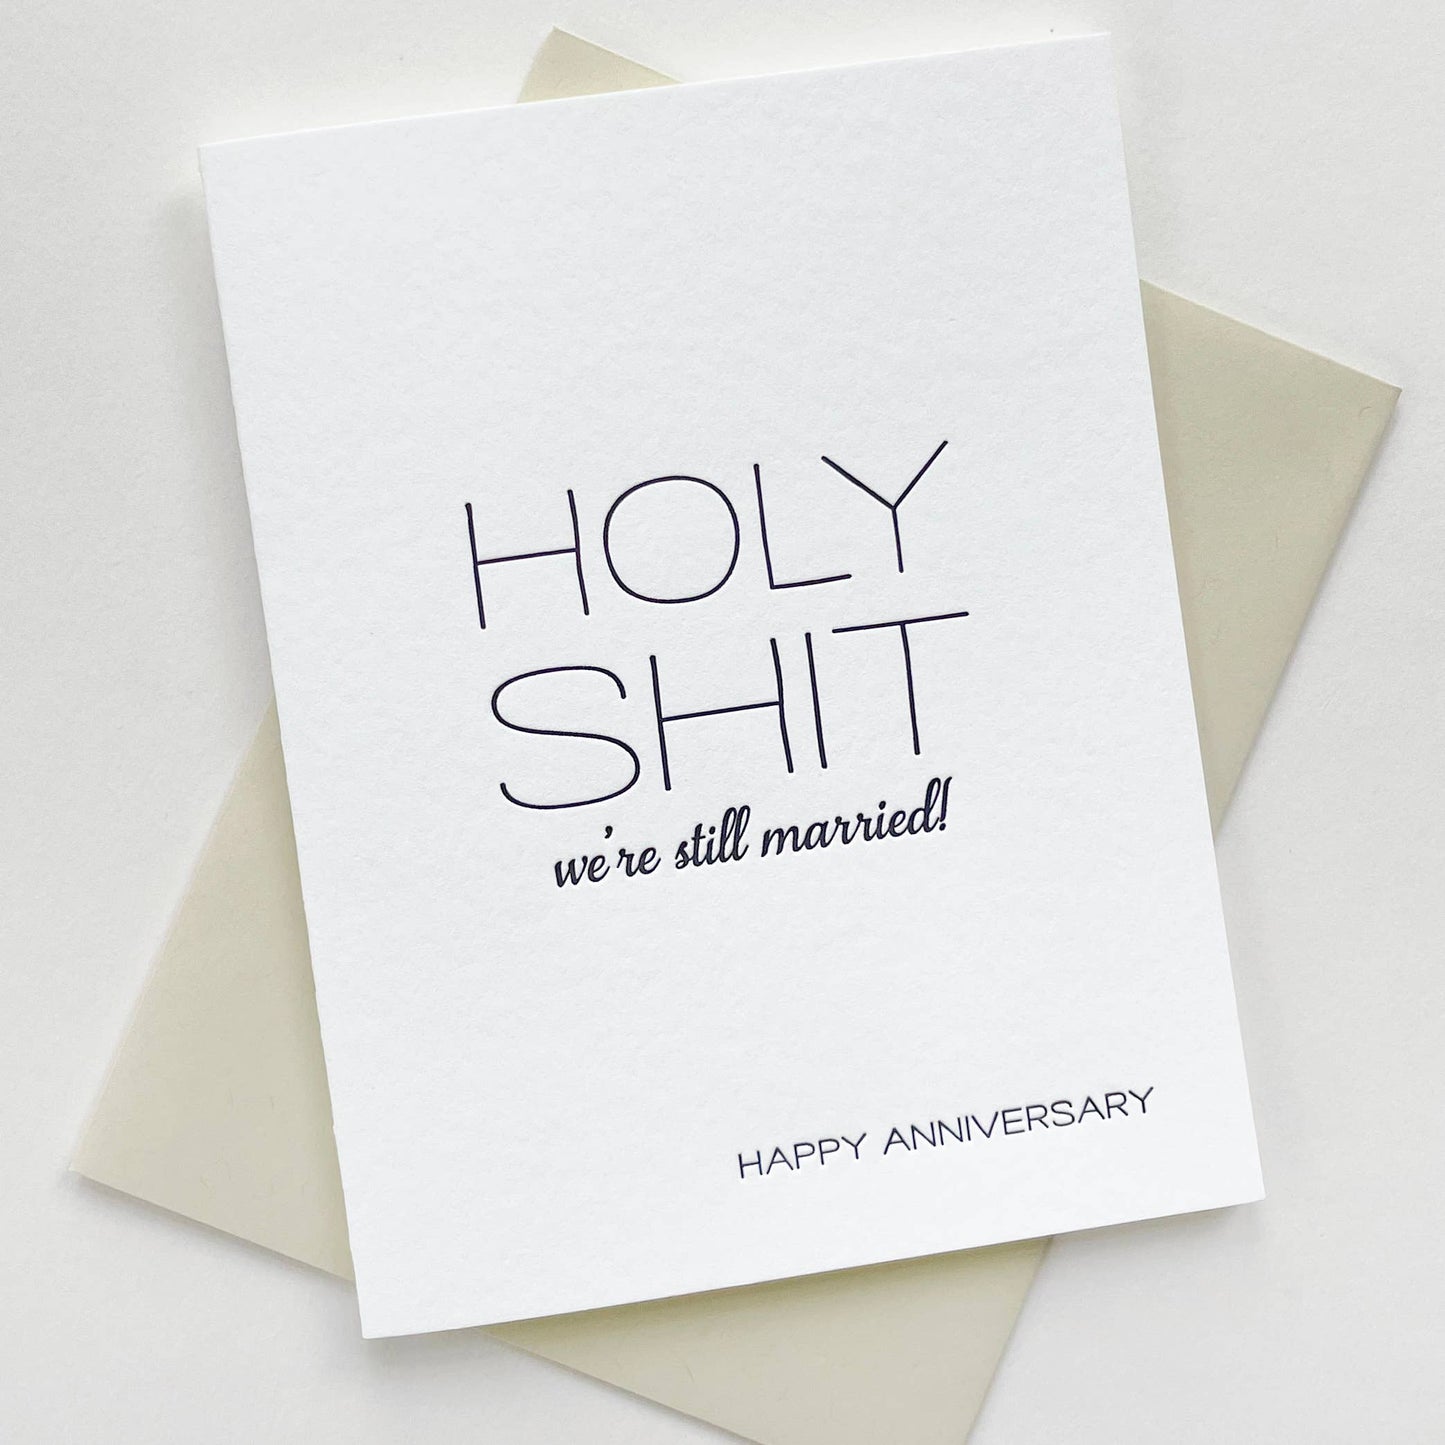 Holy Shit - We're Still Married Card